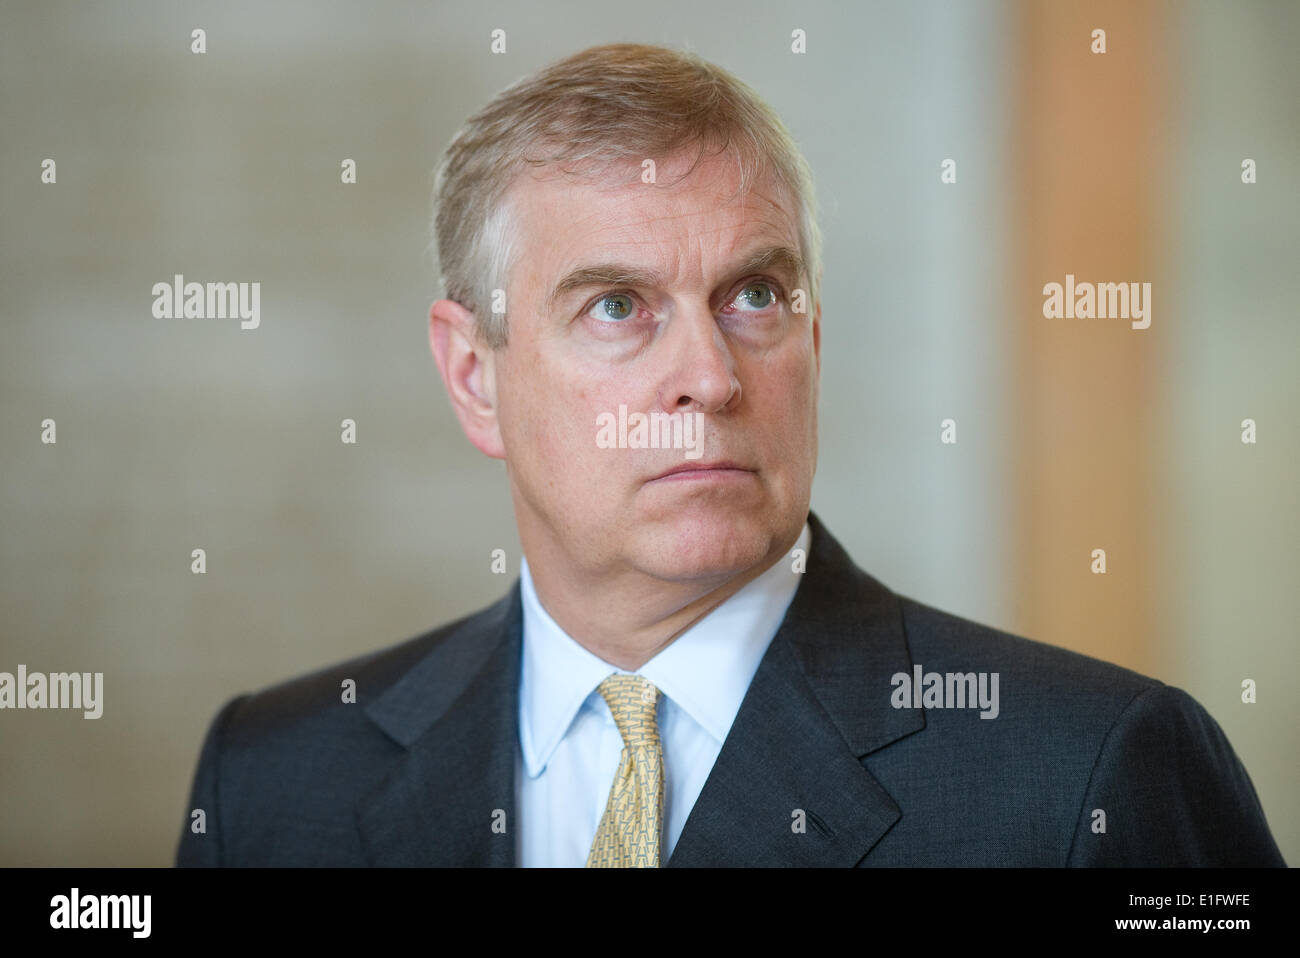 Goettingen, Germany. 03rd June, 2014. Prince Andrew, Duke of York, visits Georg August University in Goettingen, Germany, 03 June 2014. The son of the English Queen is visiting Lower Saxony on 03 and 04 June 2014. Photo: SWEN PFOERTNER/dpa/Alamy Live News Stock Photo